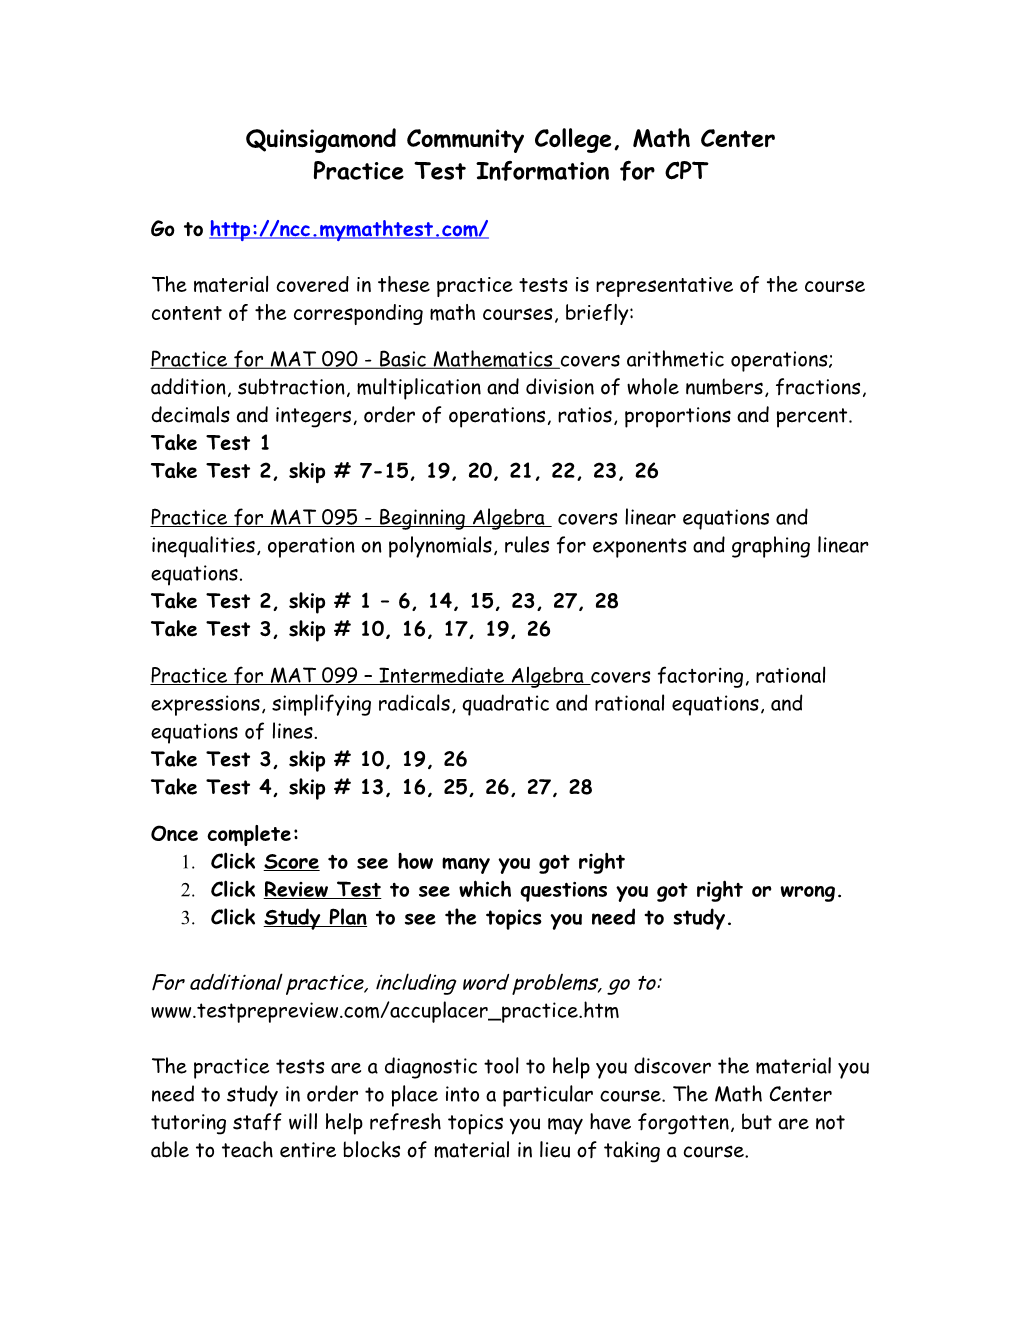 Practice Test Information for CPT